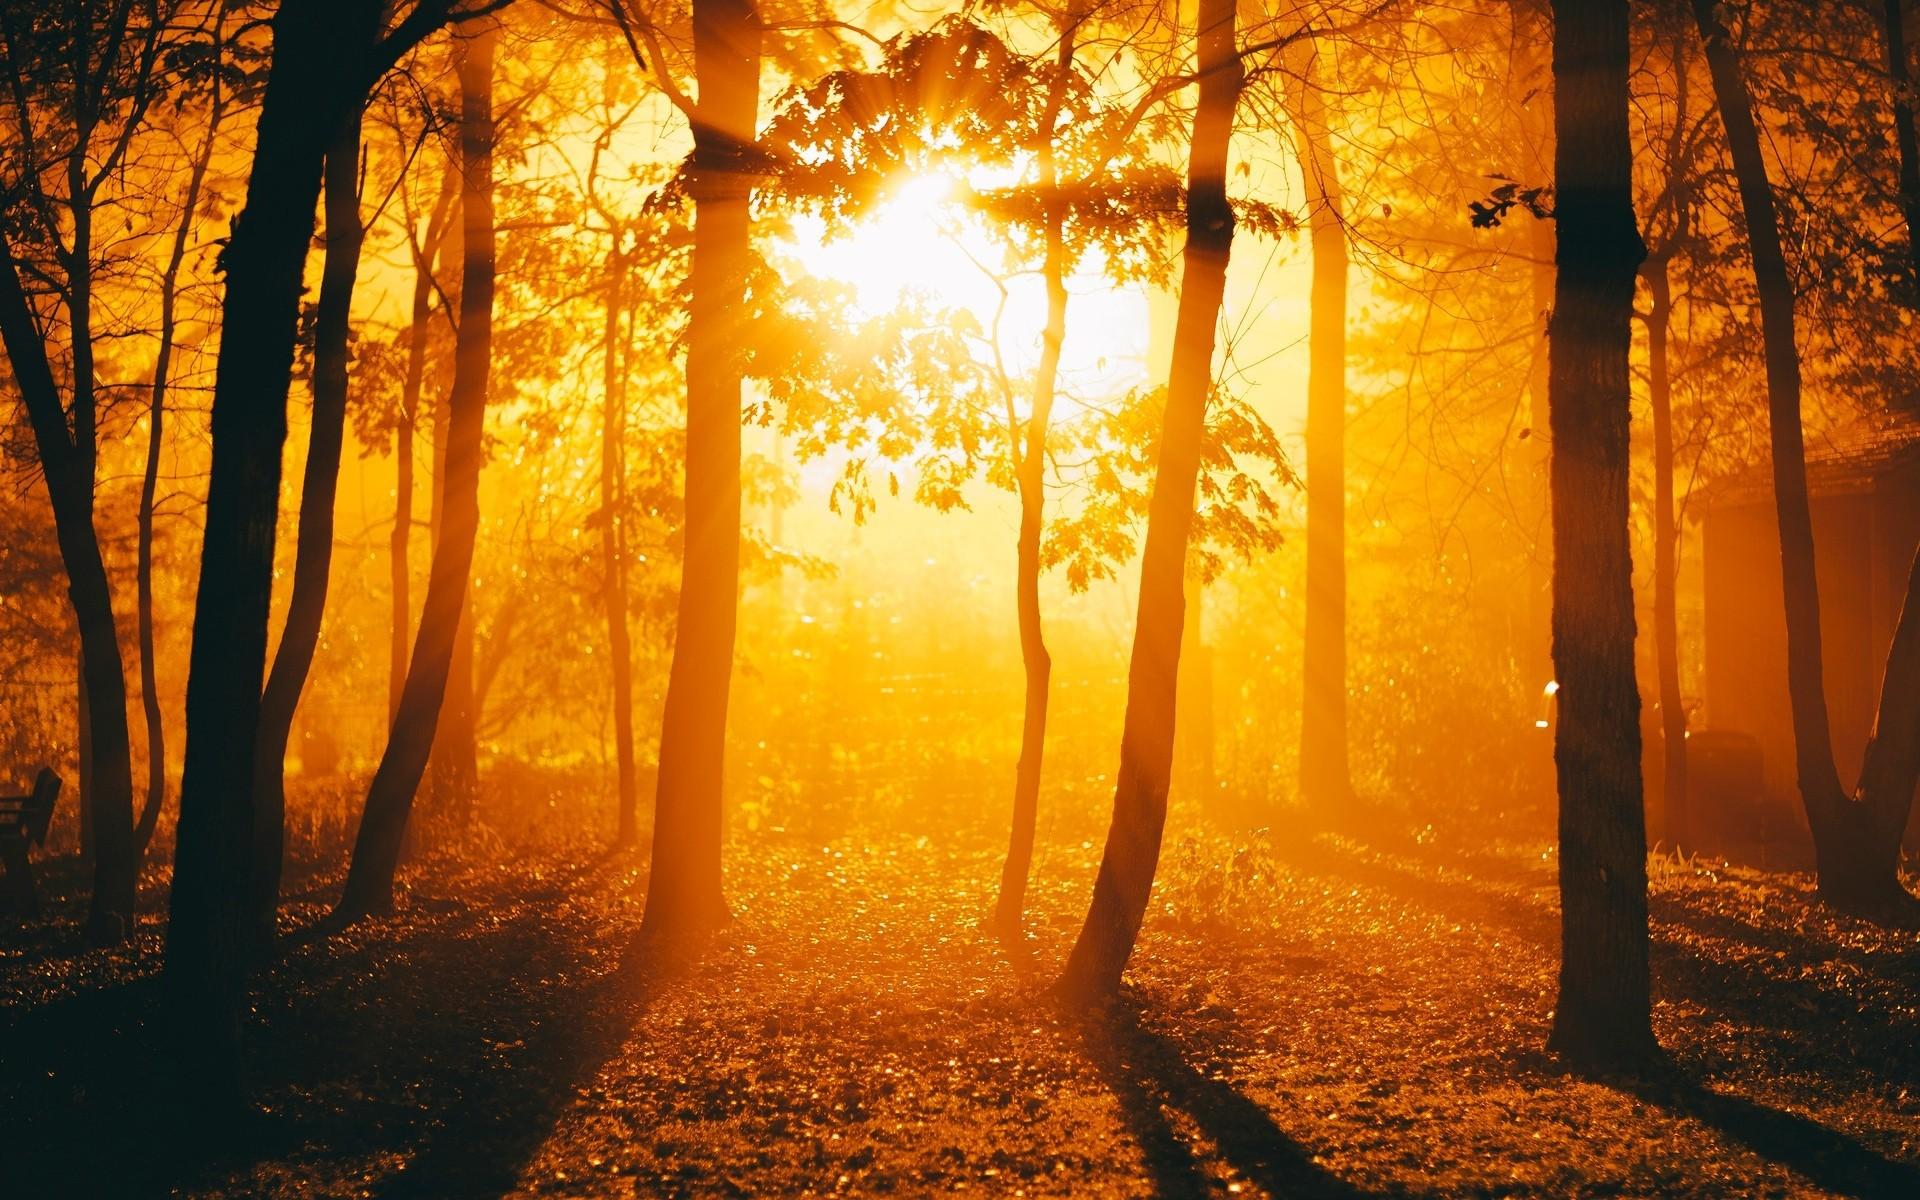 Fiery sunset in autumn forest wallpaper and image